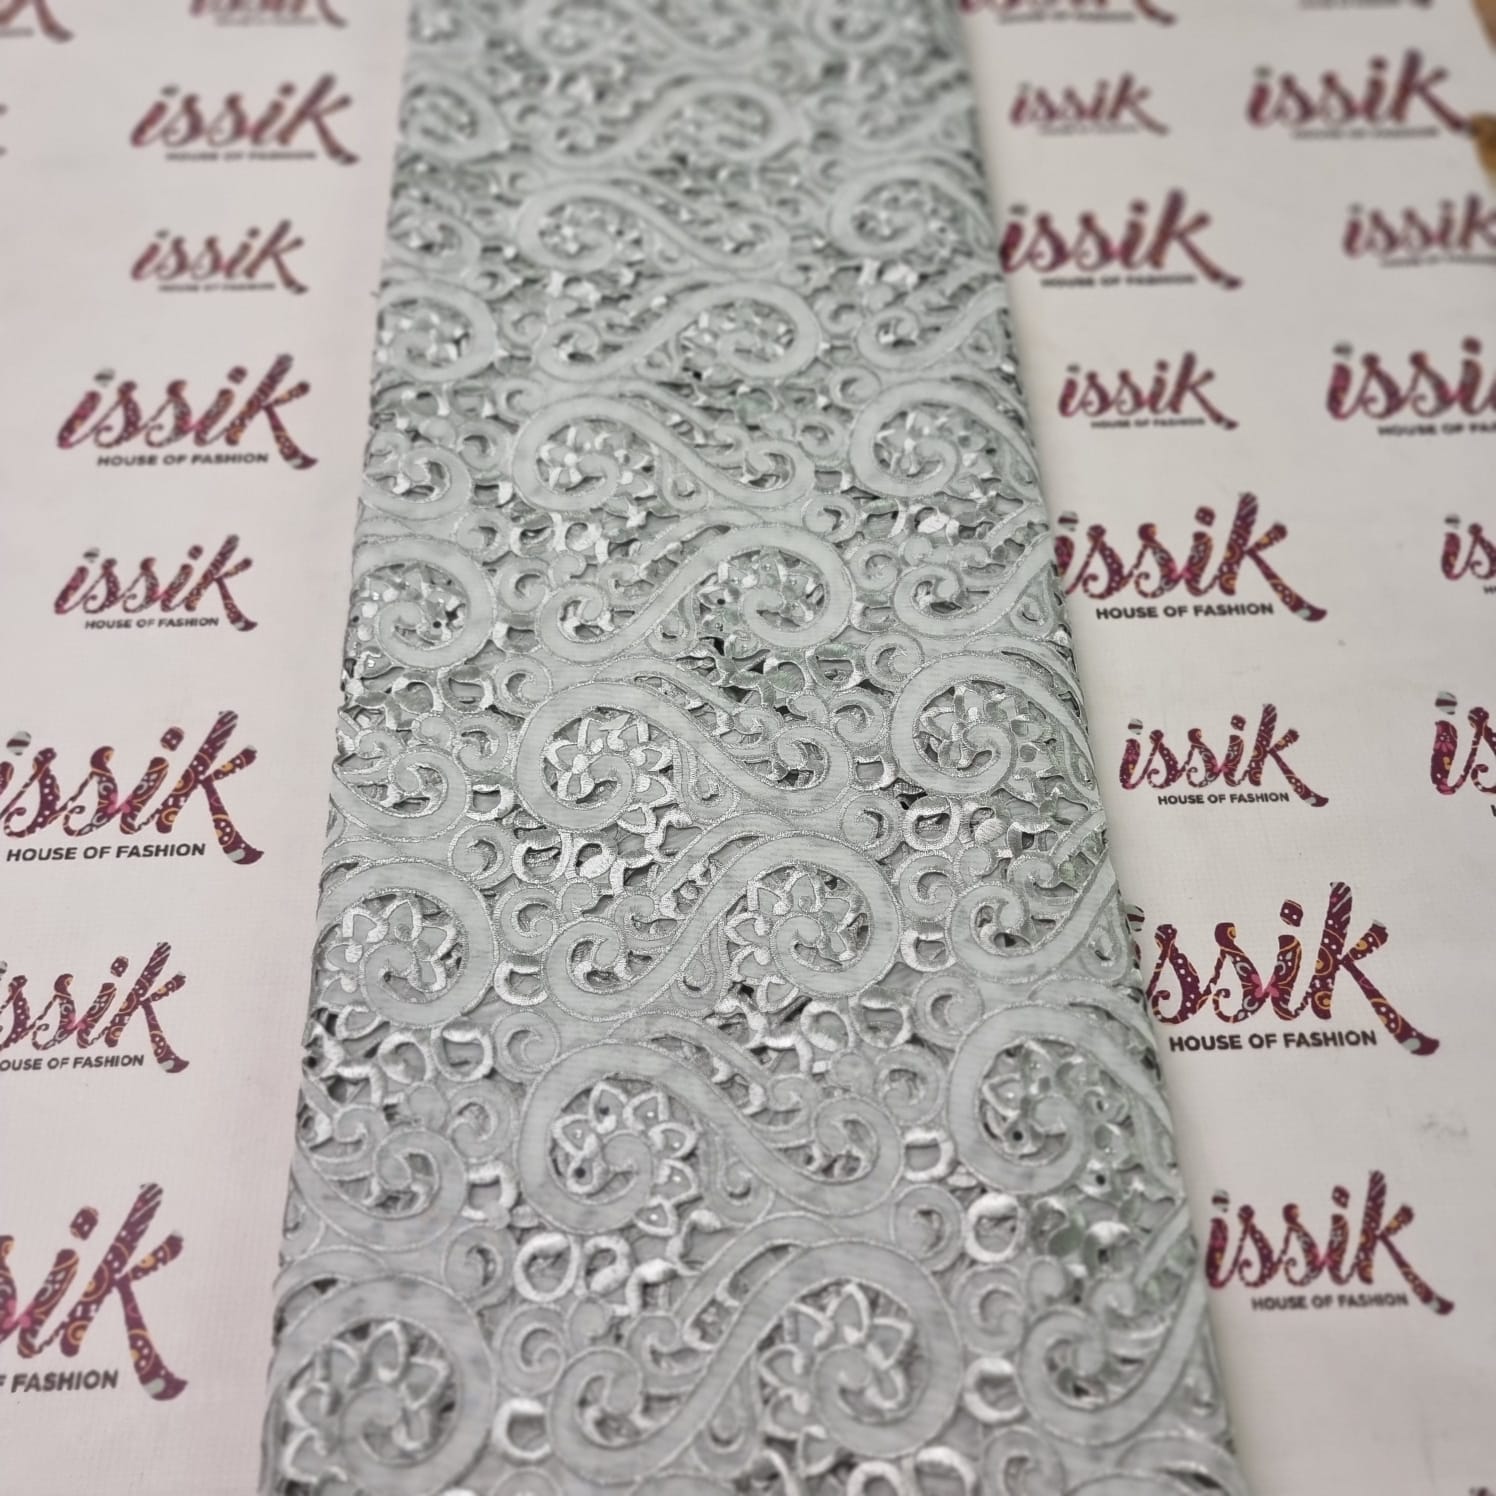 White & Silver Hand Cut Organza Lace Fabric. - House of Prints